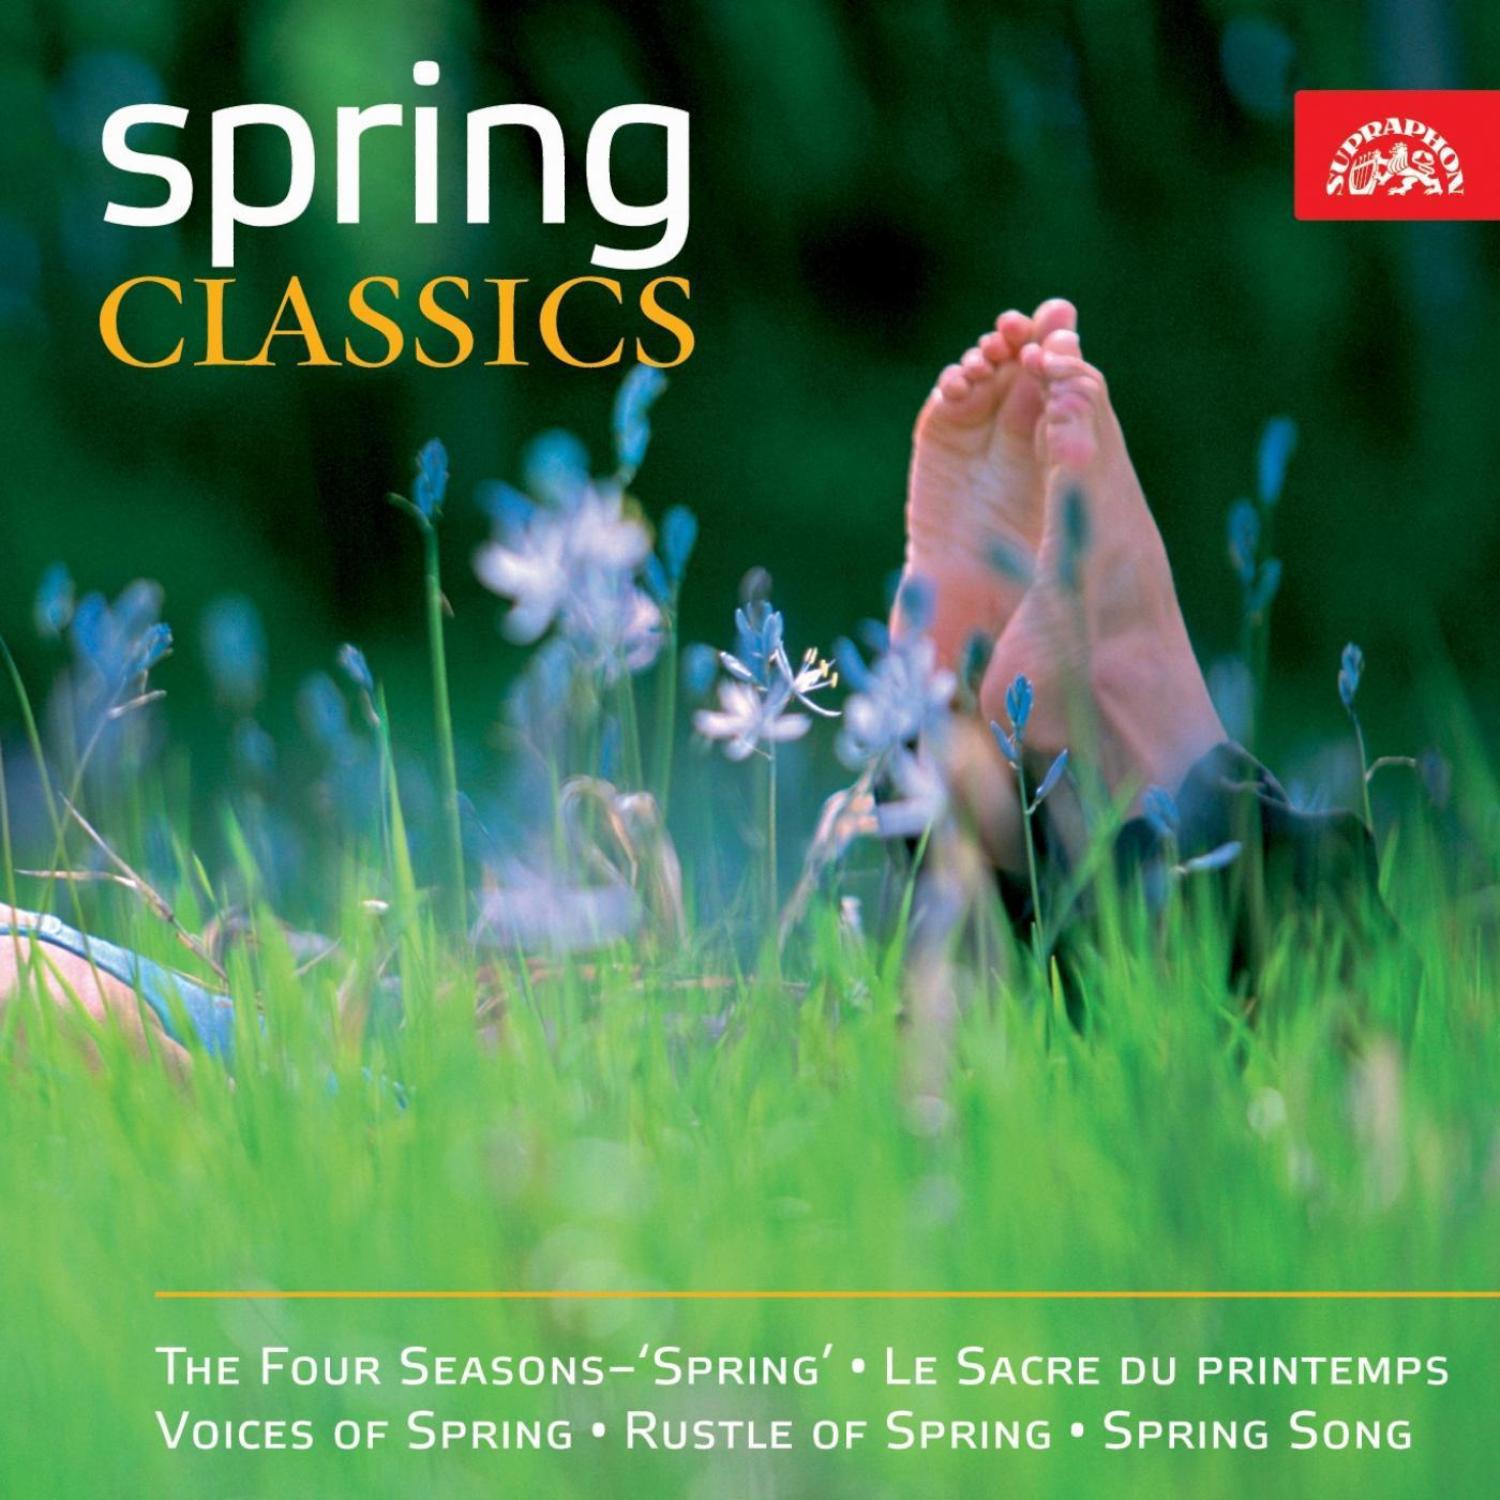 Songs without Words - "Spring Song", Op. 62, No. 6